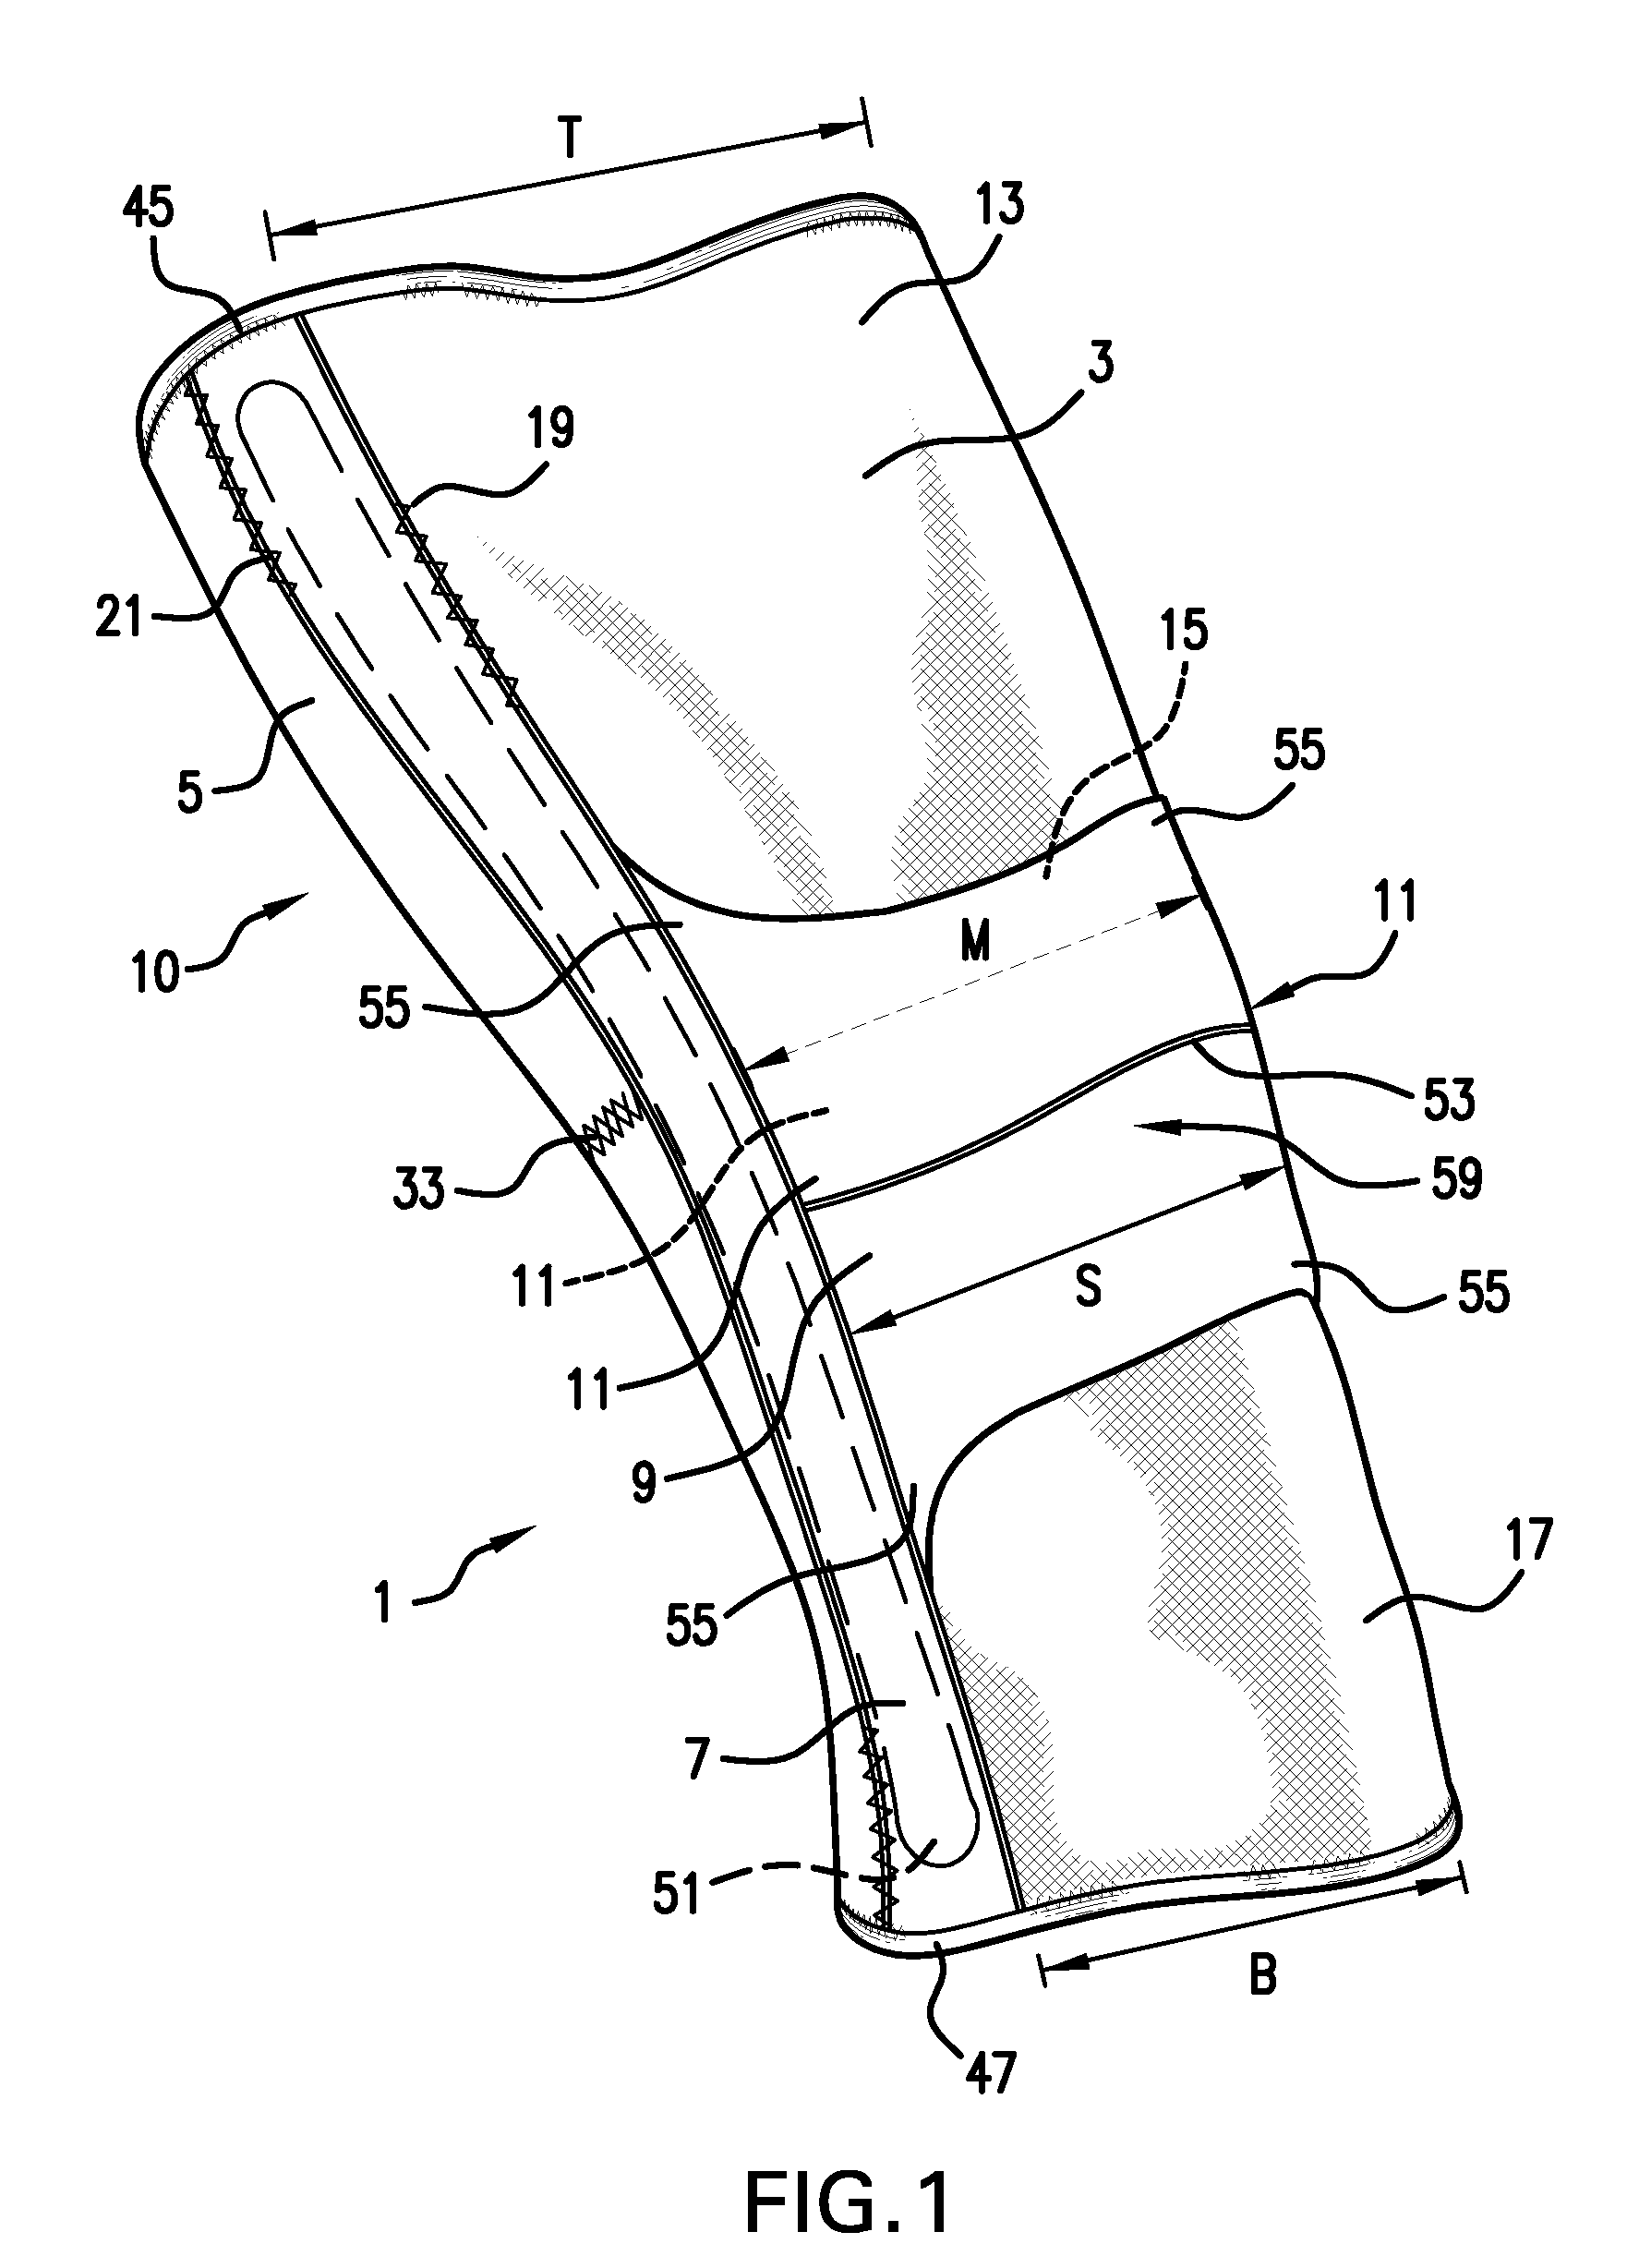 Apparatus for and method of diagnosing and treating patello-femoral misalignment